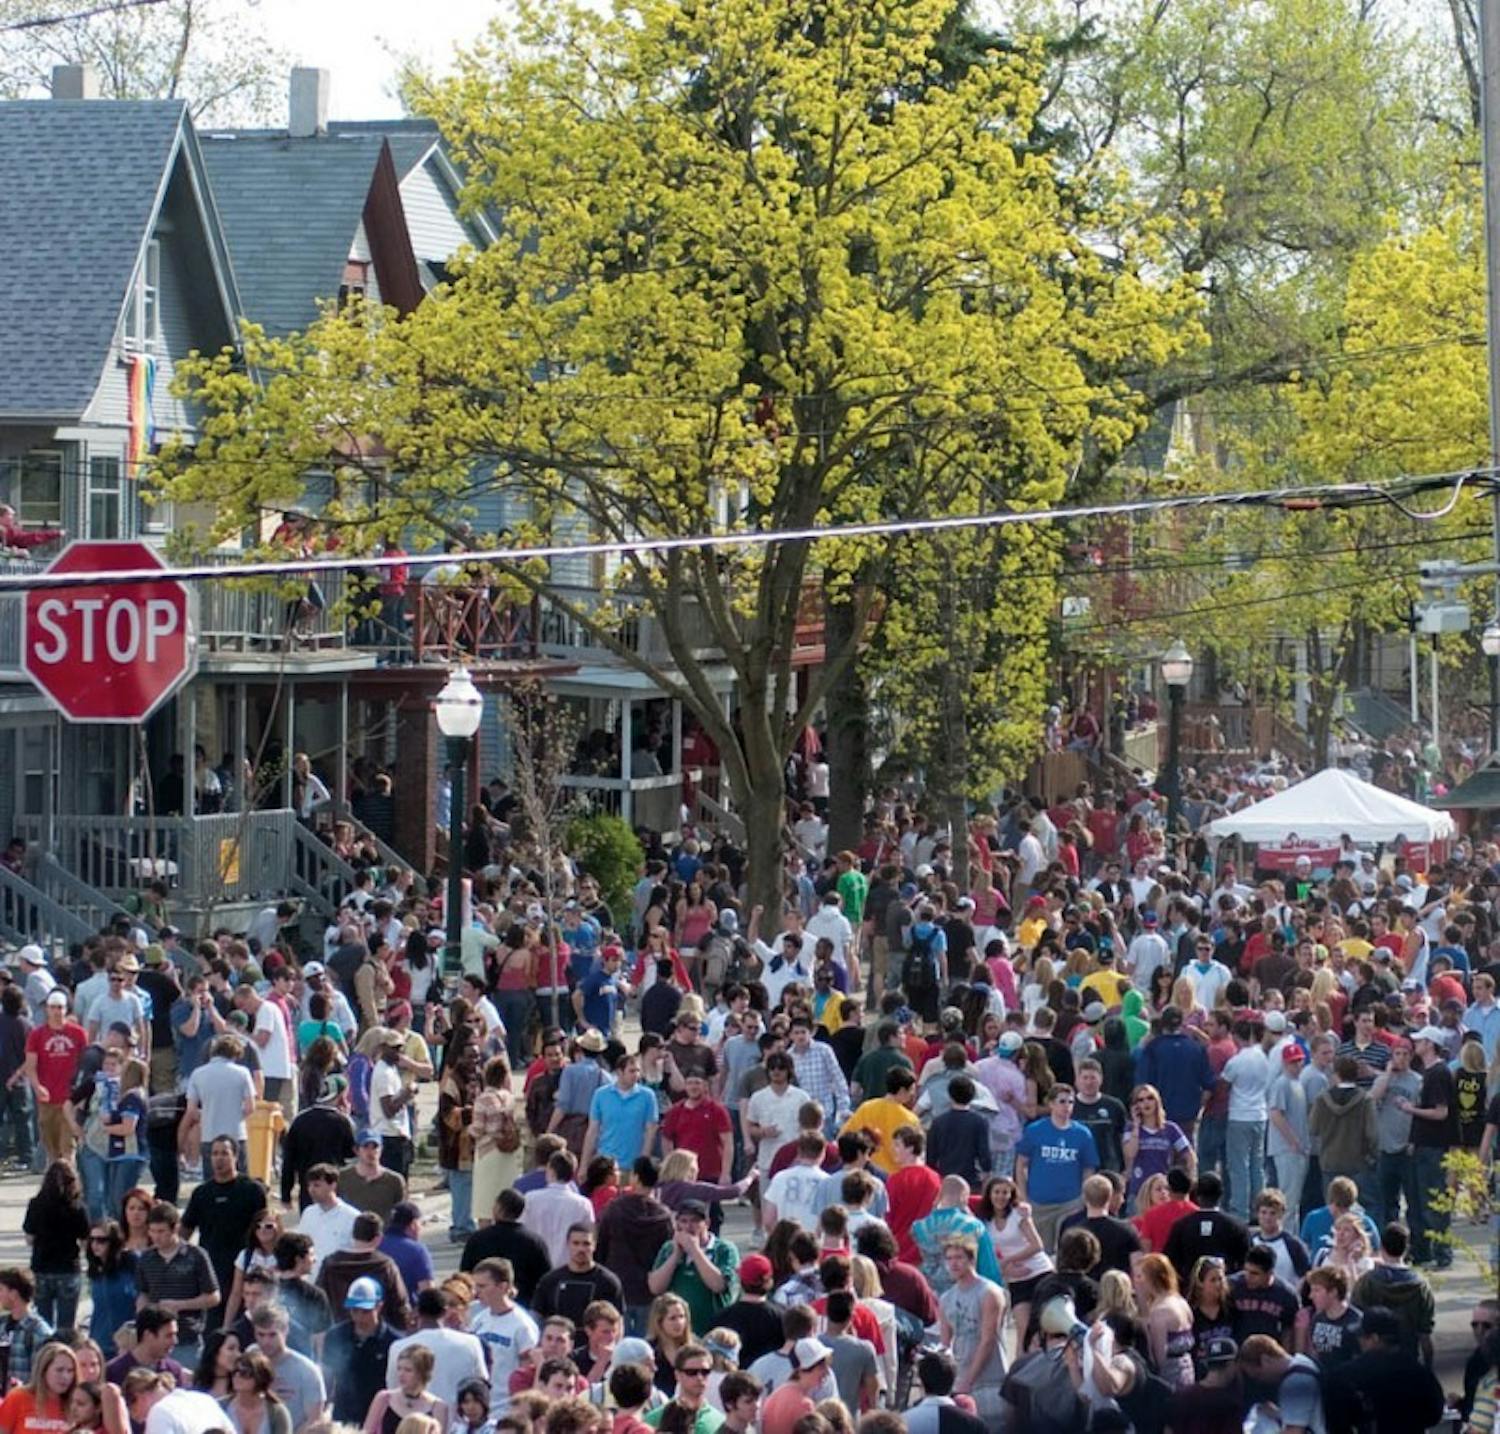 New plans for Mifflin St. Block Party presented